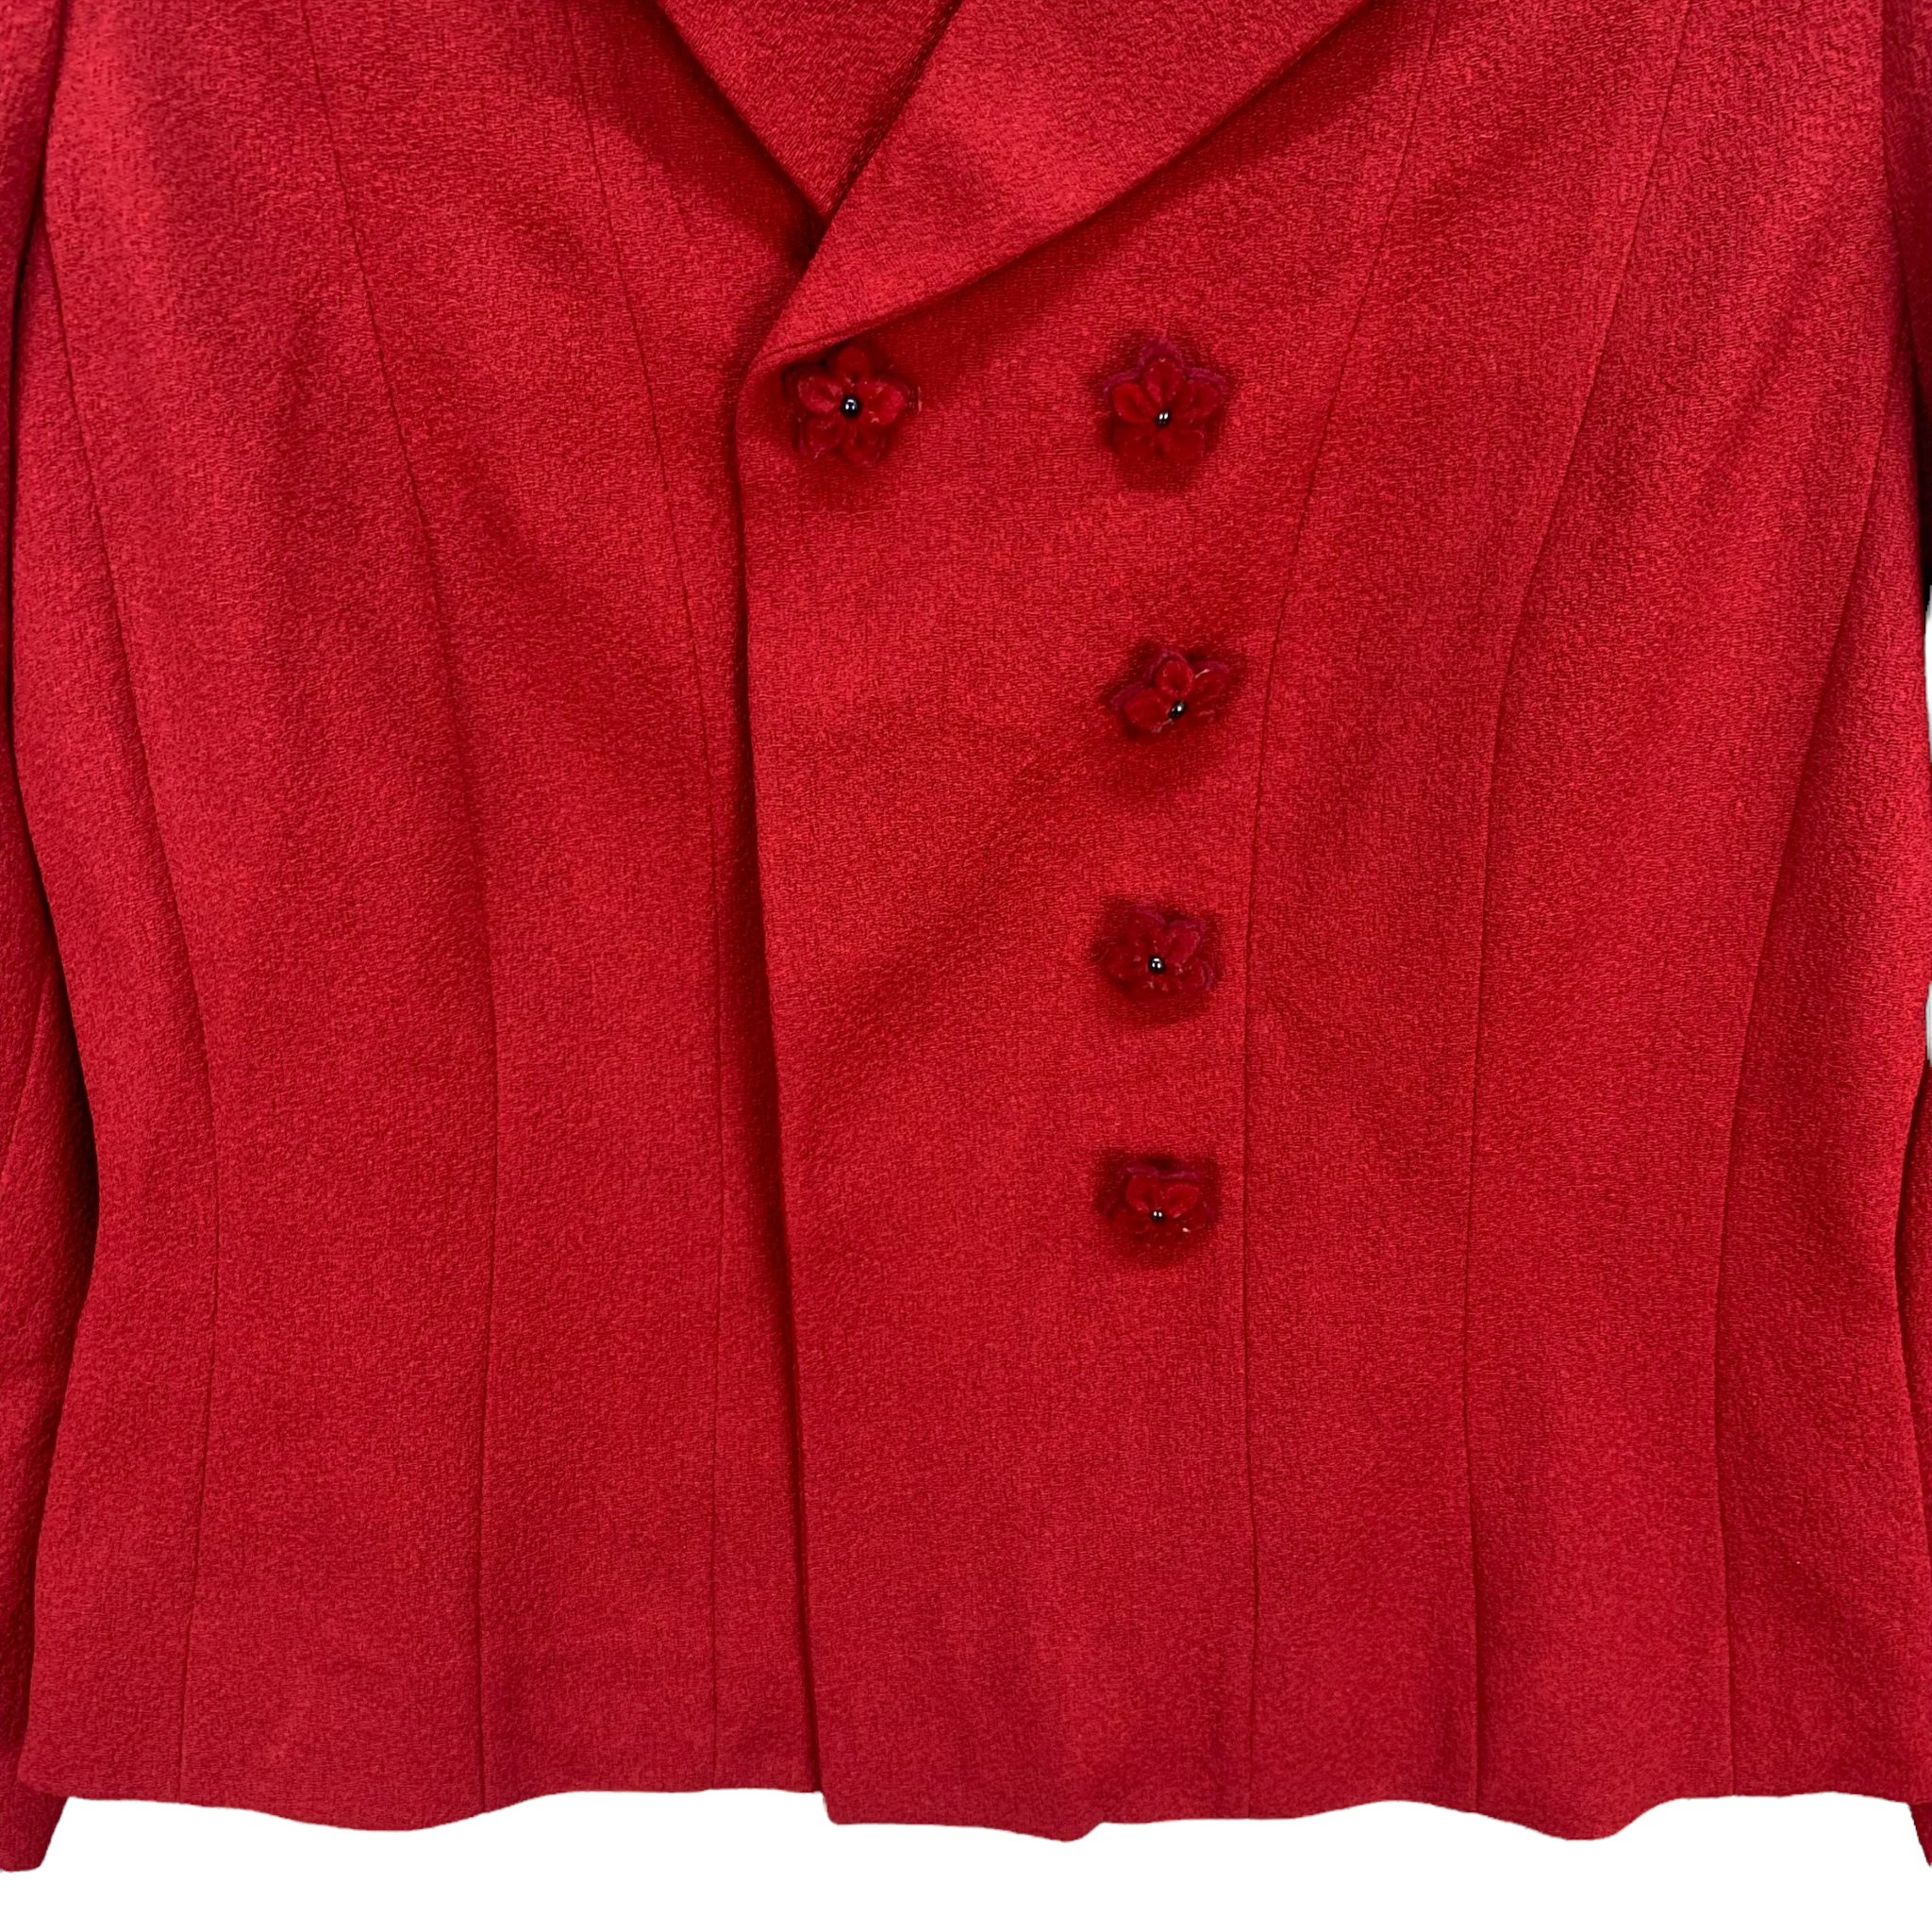 Moschino Cheap and Chic Red Double Breasted Coat #3952-137 - 5